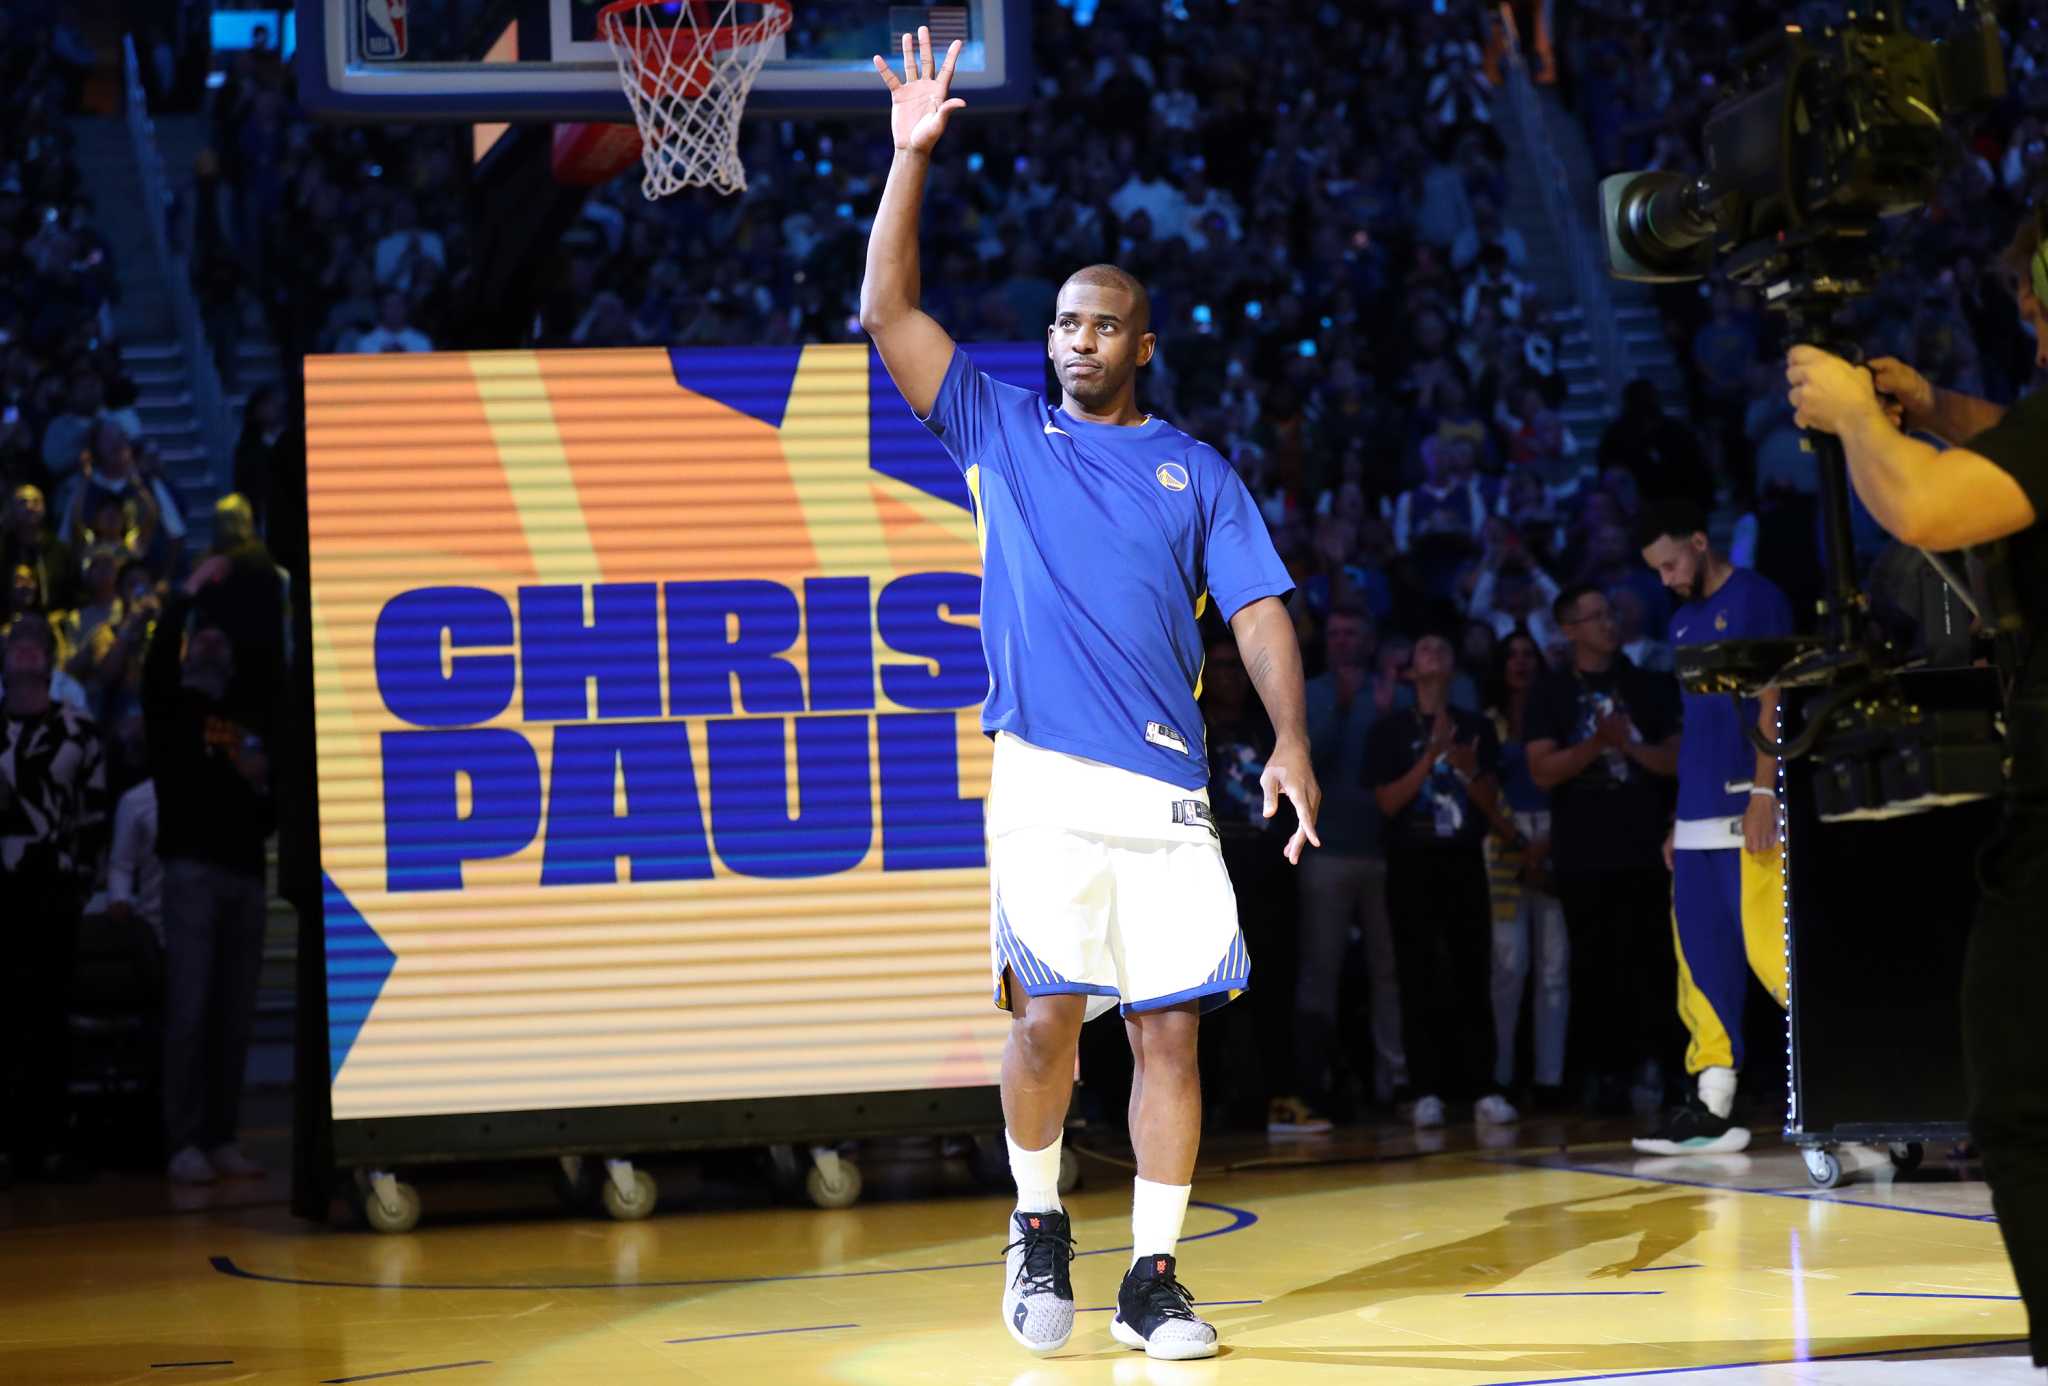 Warriors' Chris Paul struggles with his shot, but his presence is felt